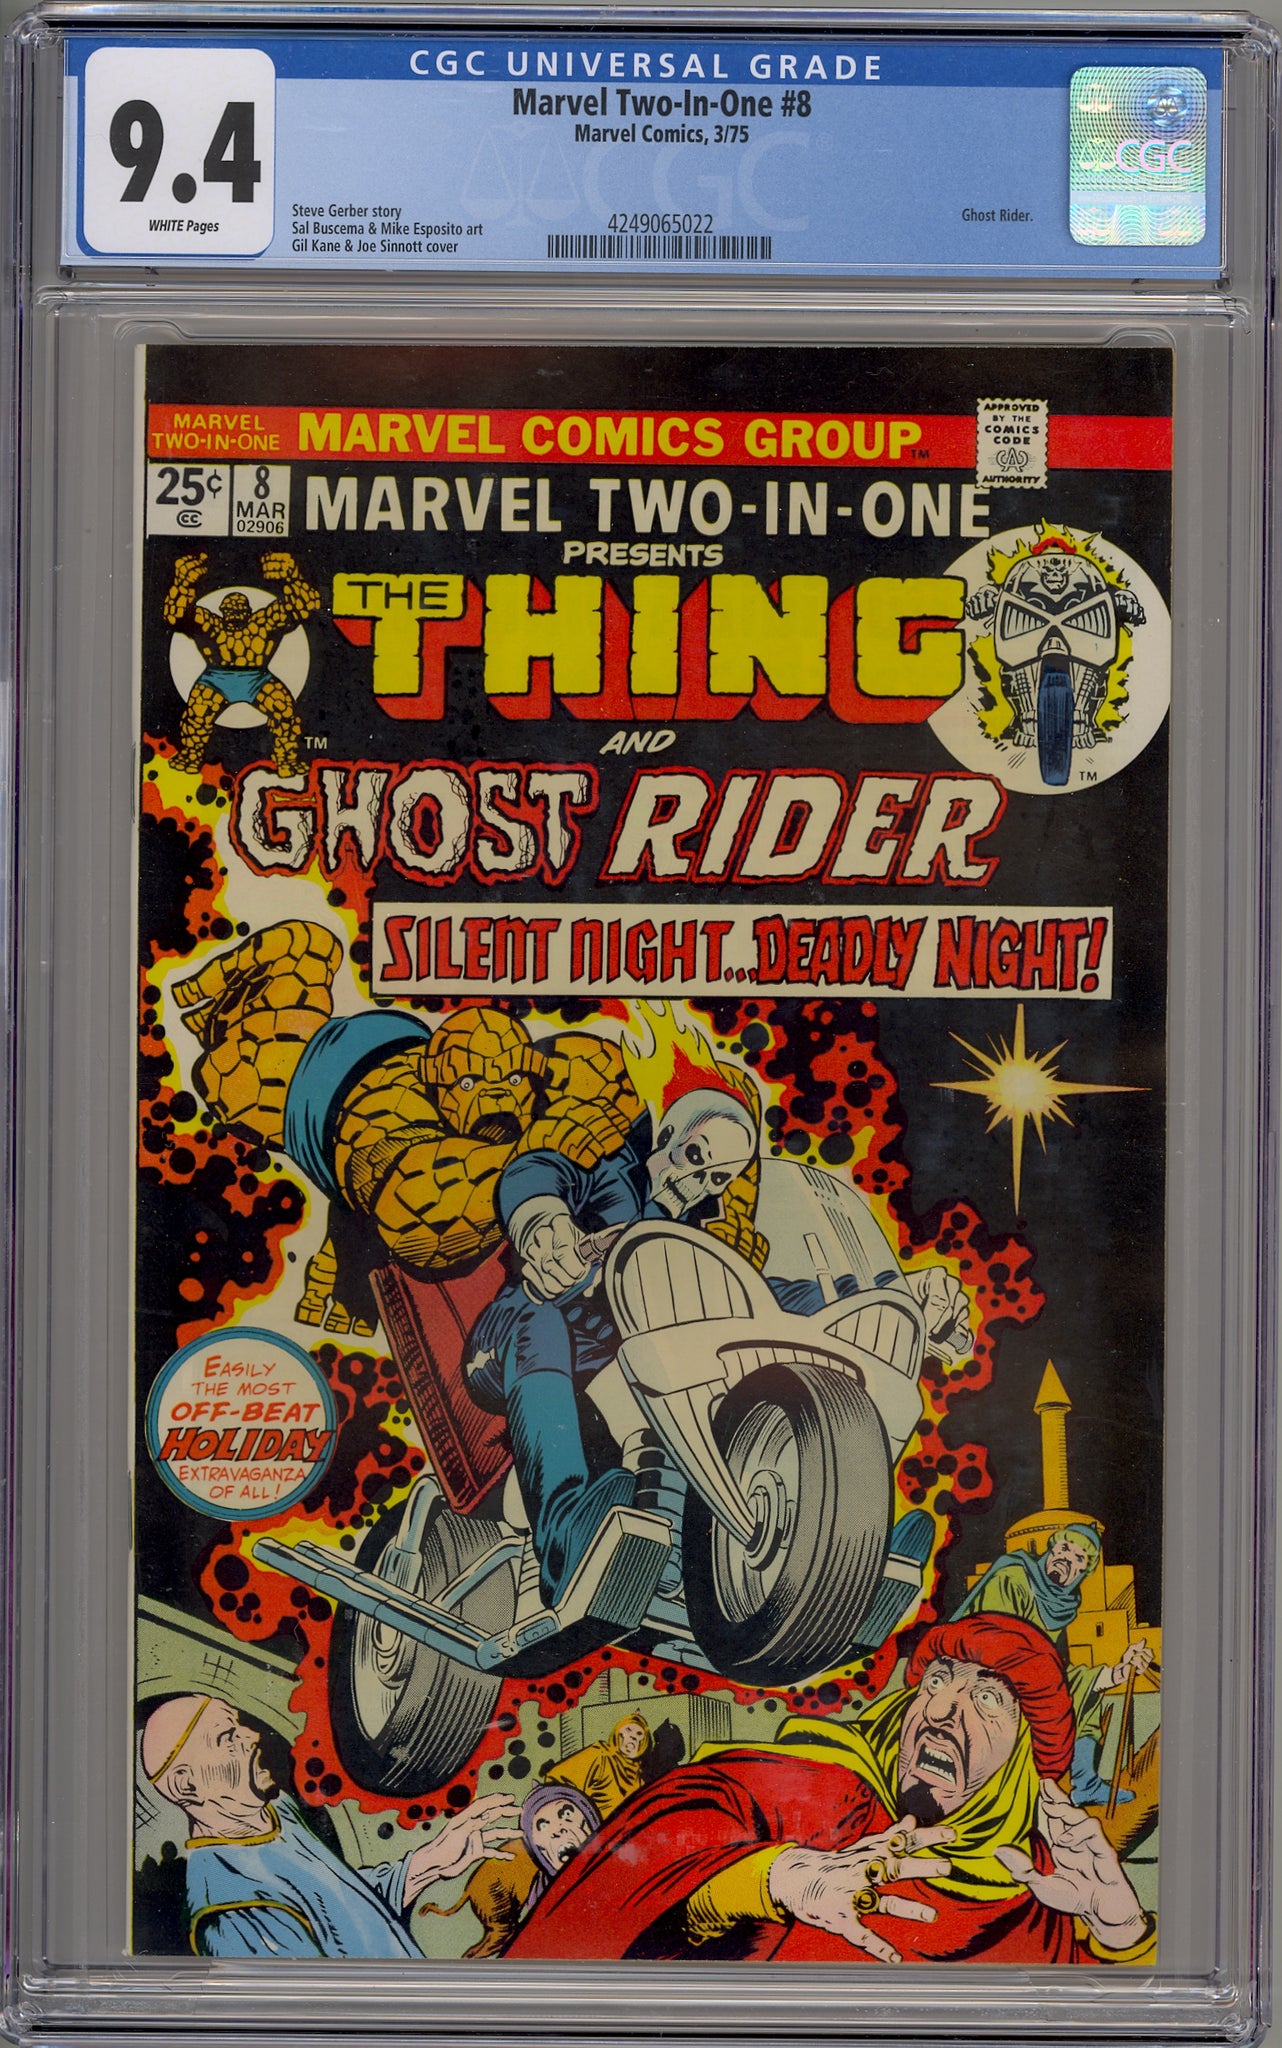 Marvel Two-In-One #8 (1975) Ghost Rider, Thing